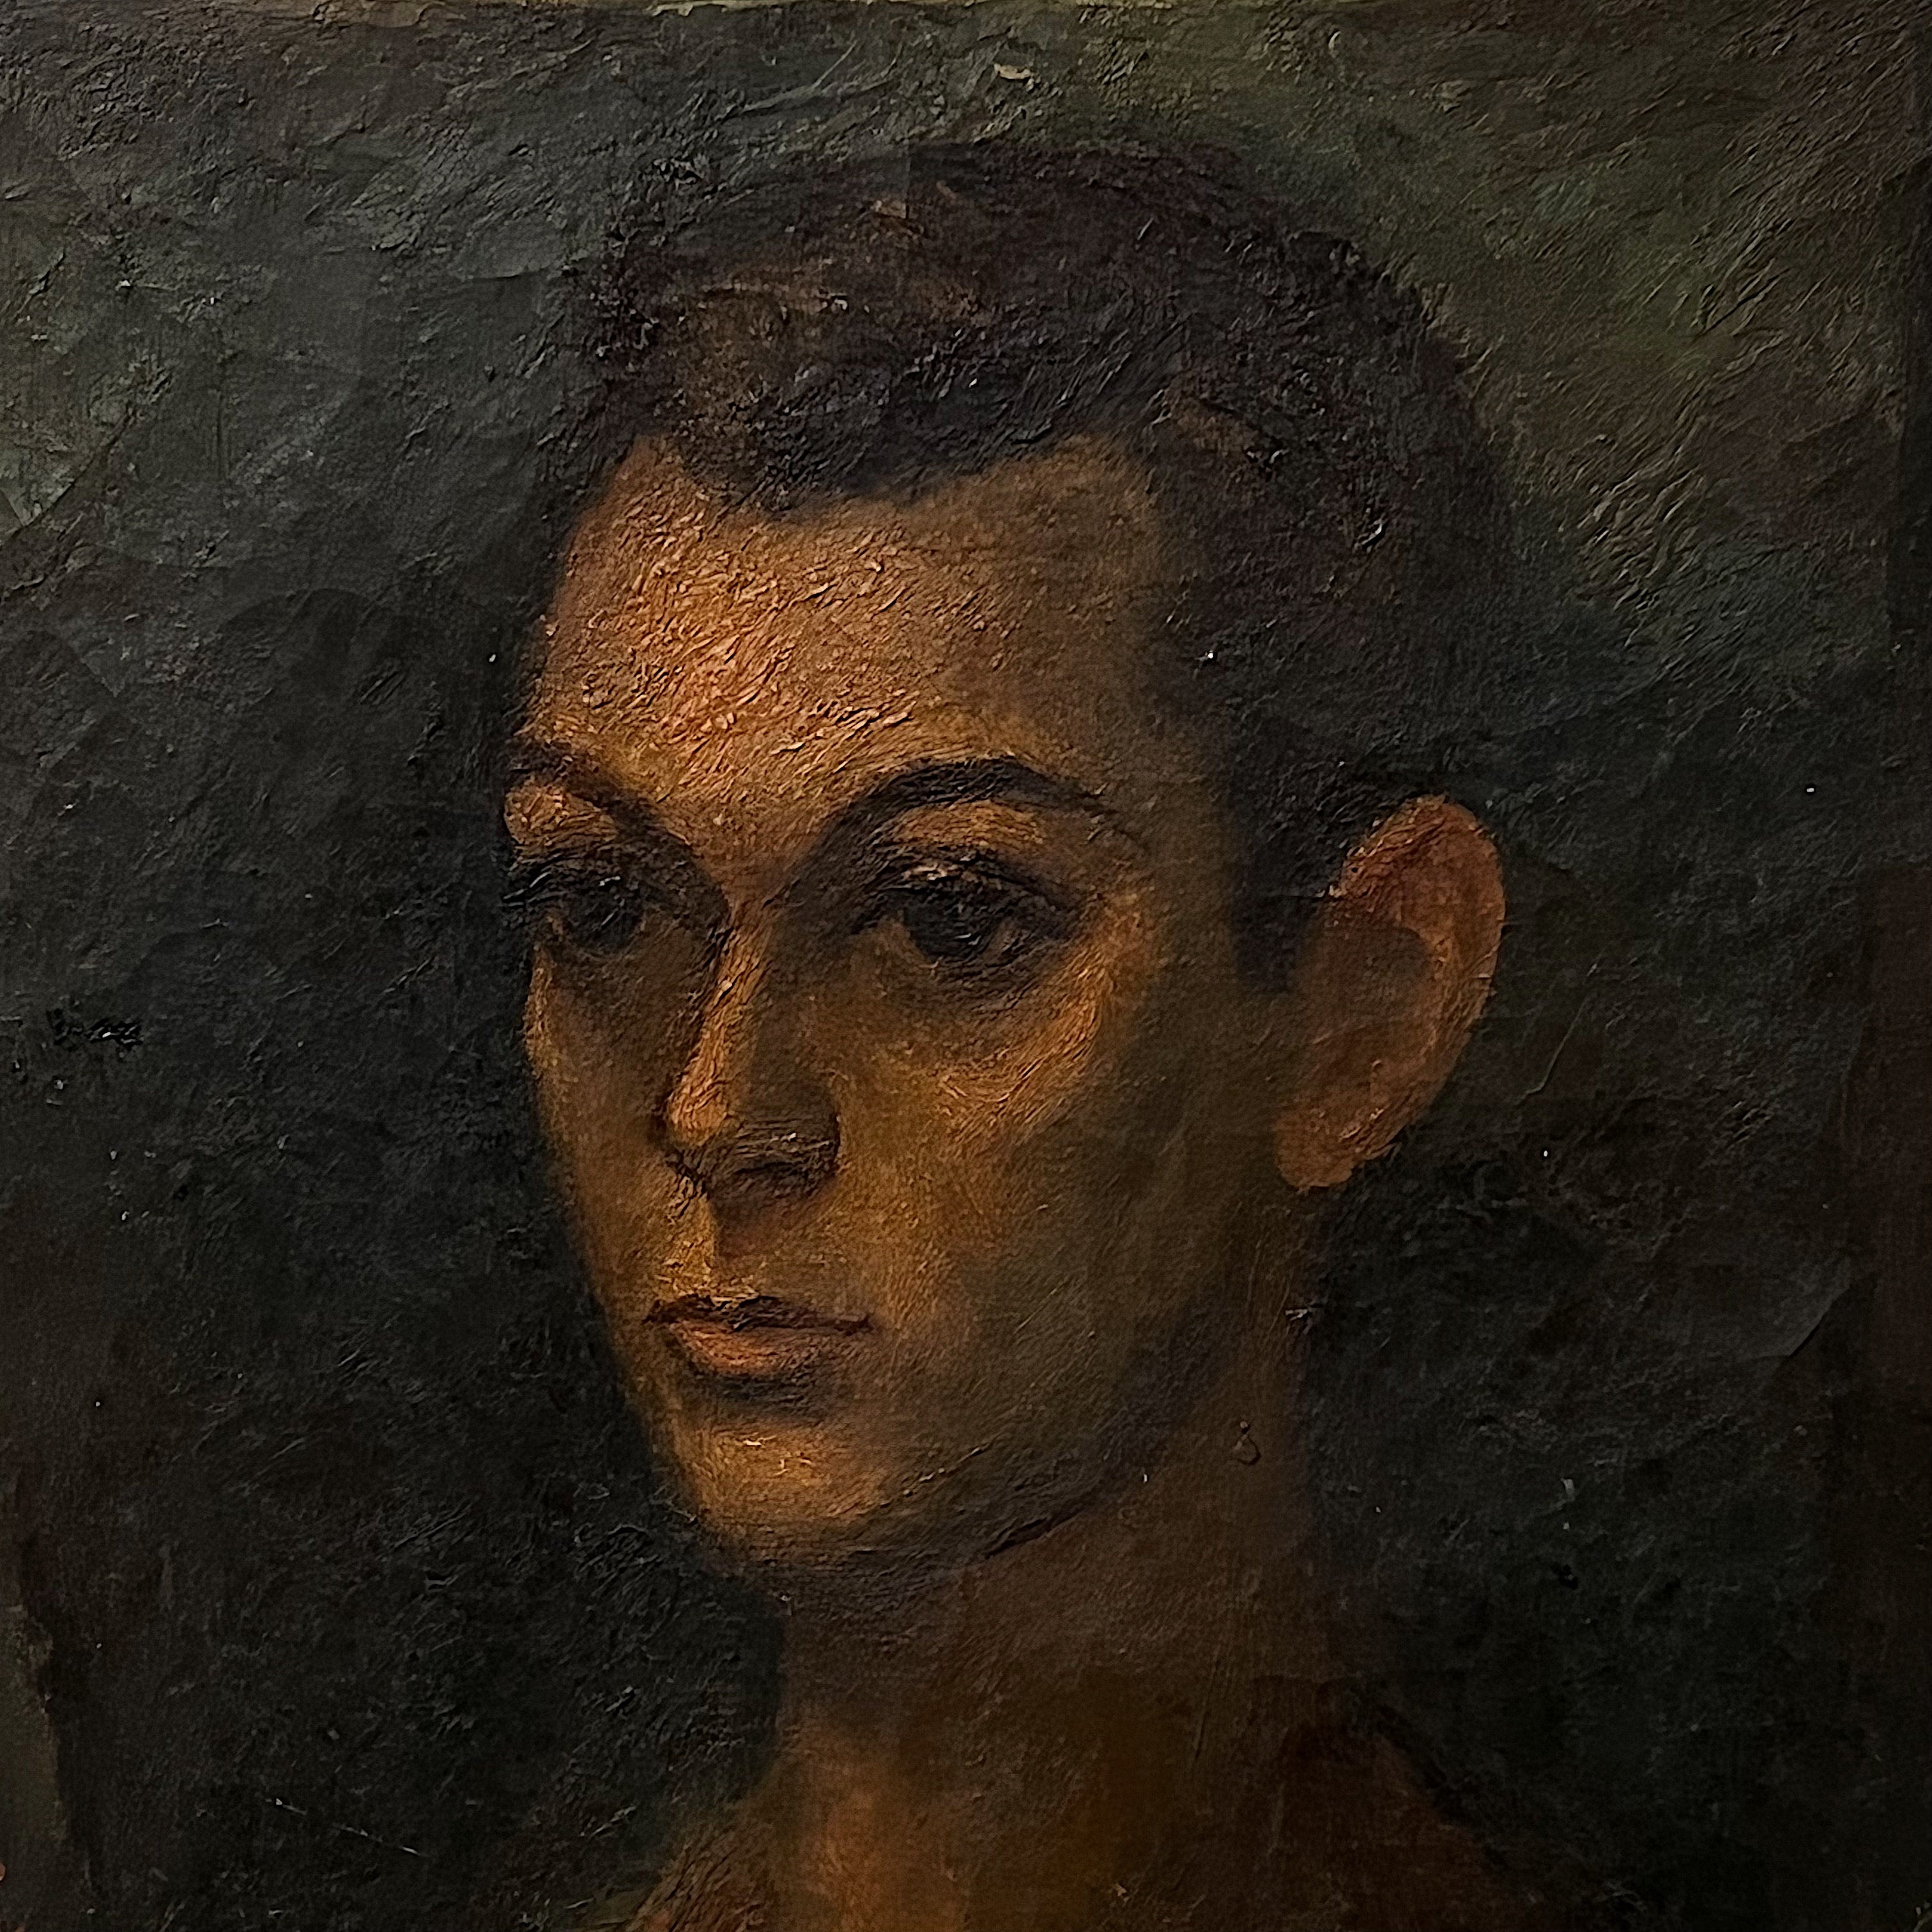 1920s Ashcan Painting of Young Man in Plain Clothes - Social Realism Art - Rare Early 1900s Paintings - Signed Artwork - Dark Tones Decor